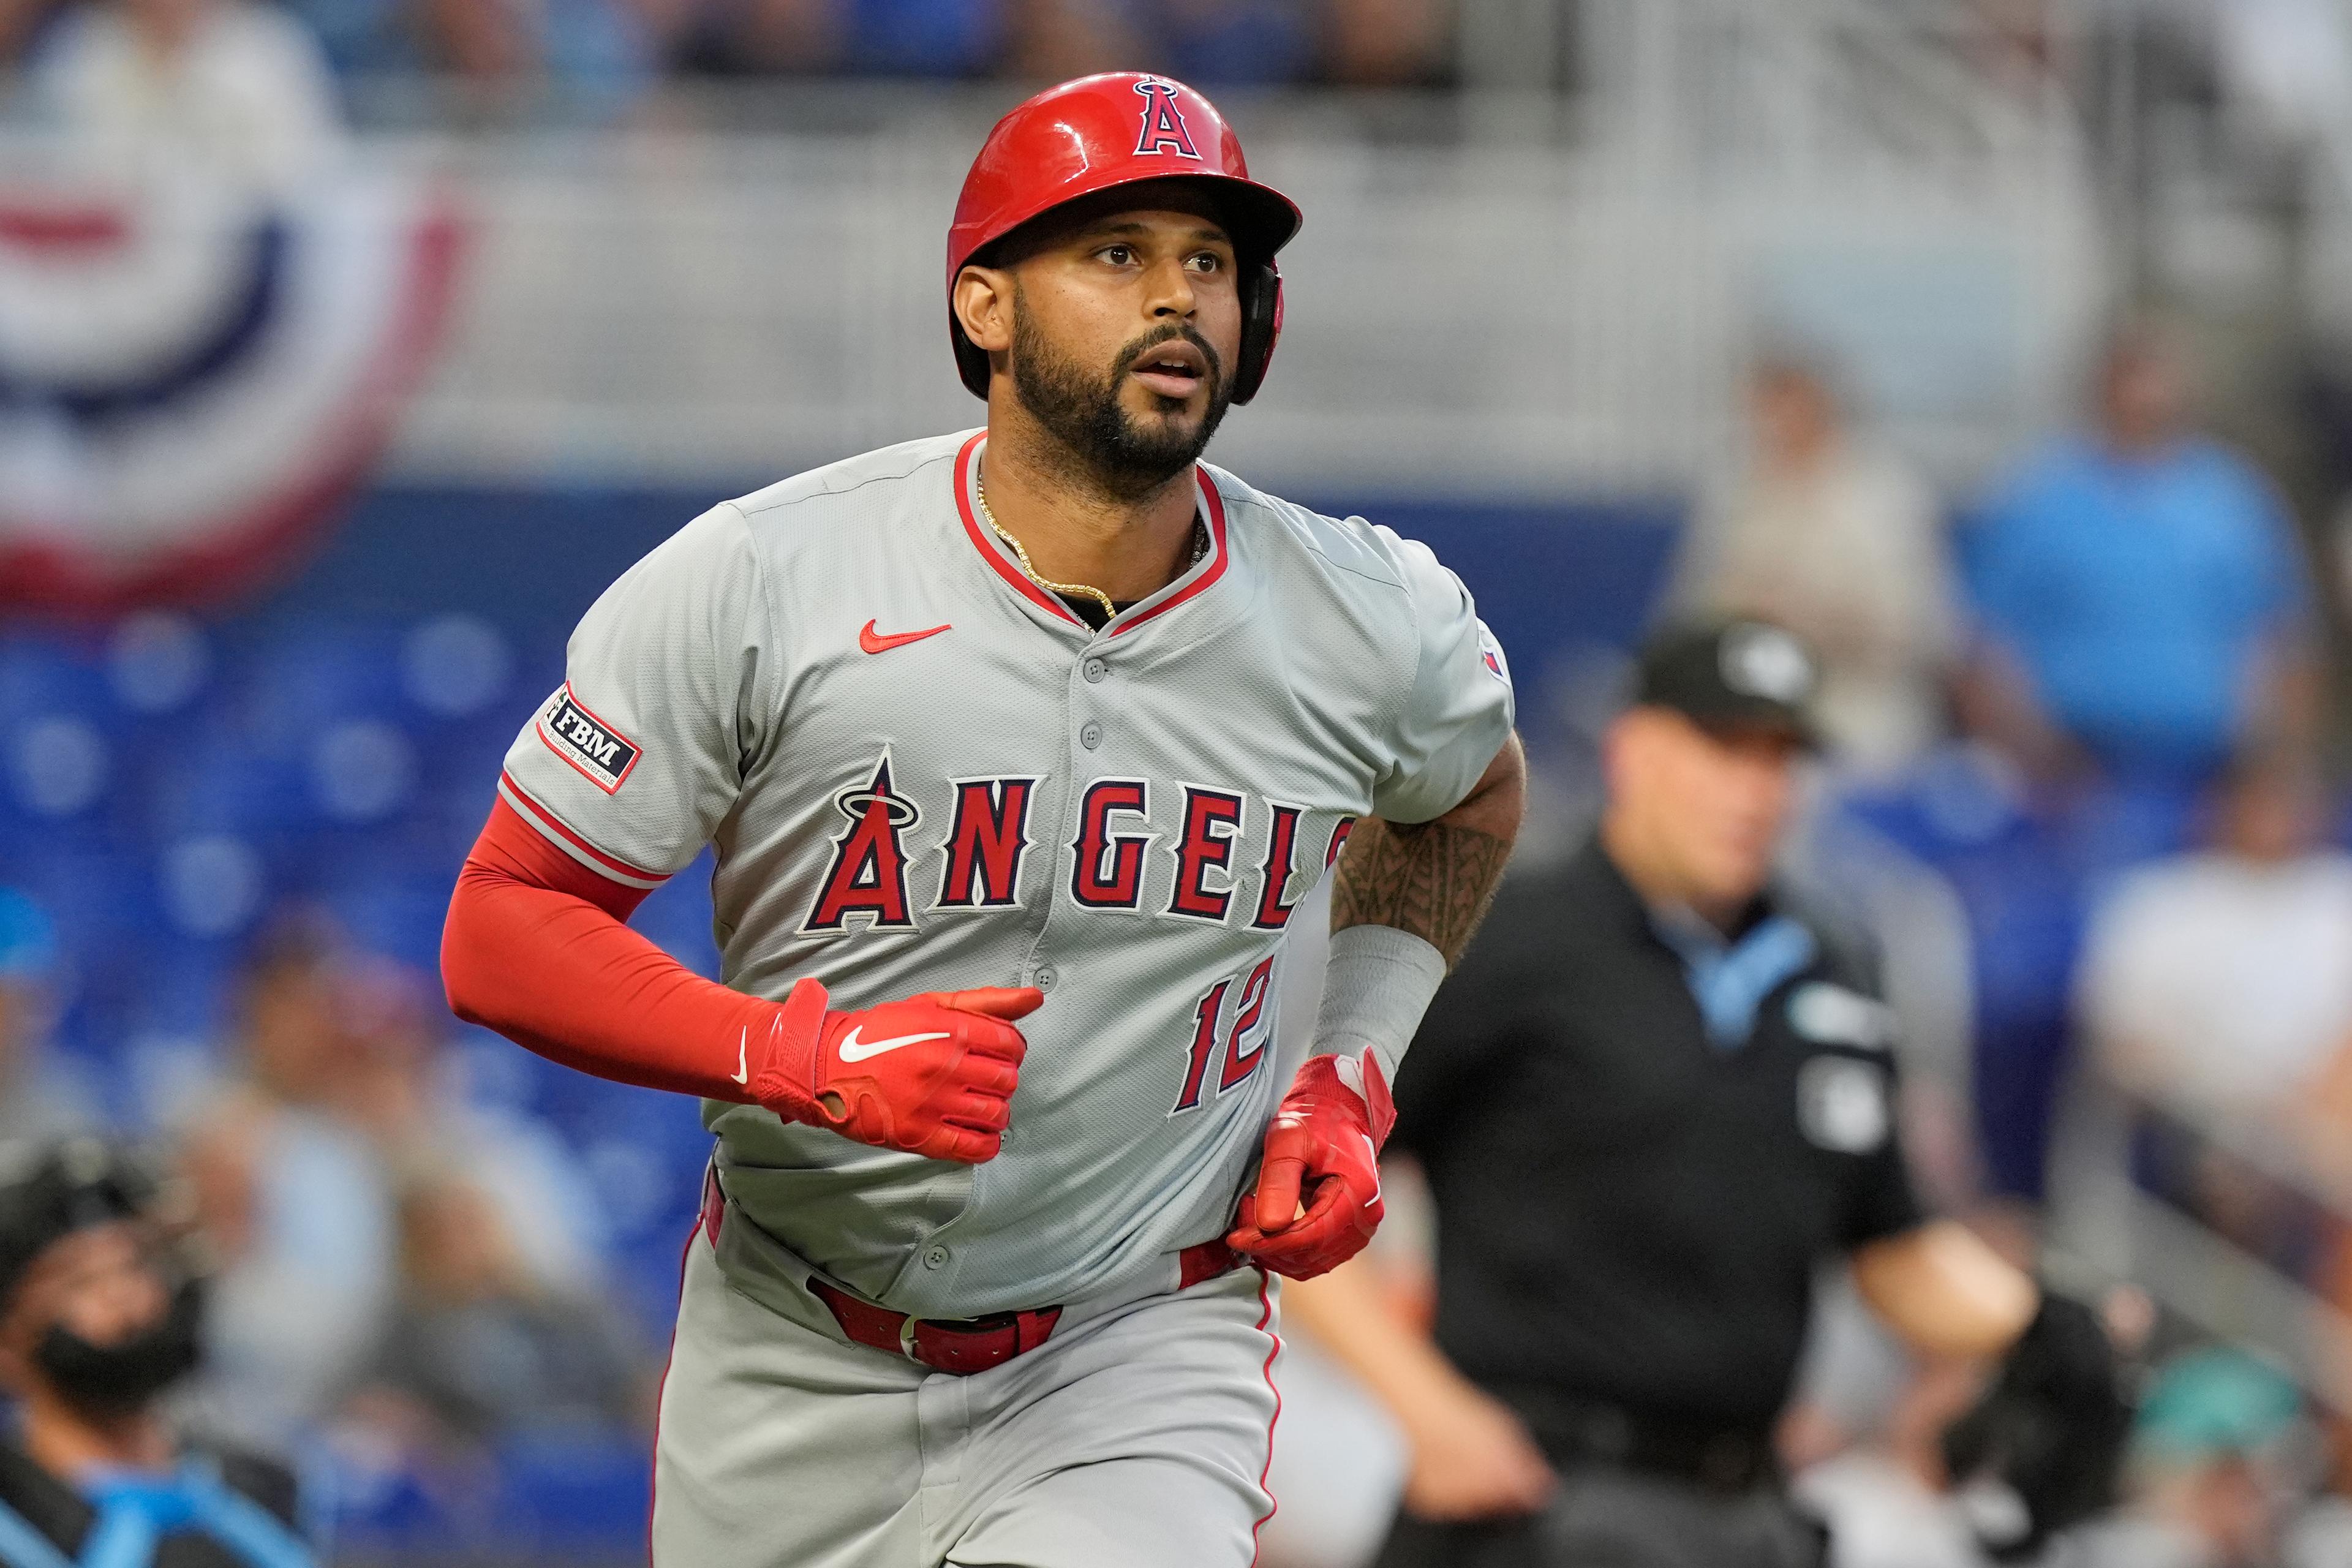 Anderson Sparkles on Mound as Angels Win Third Consecutive Game